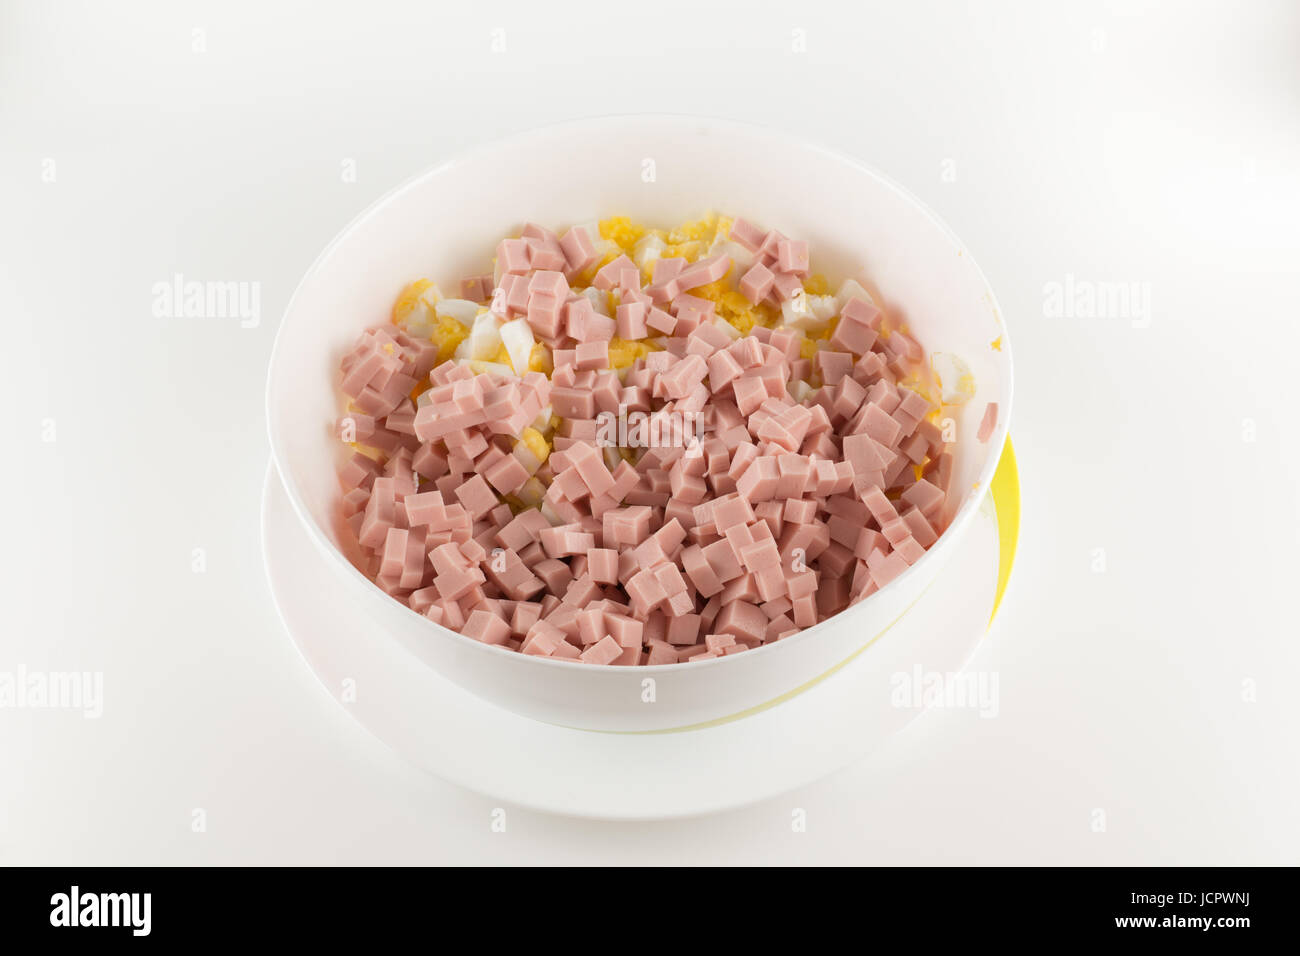 Cut sausage with egg is a preparation for meat salad Stock Photo